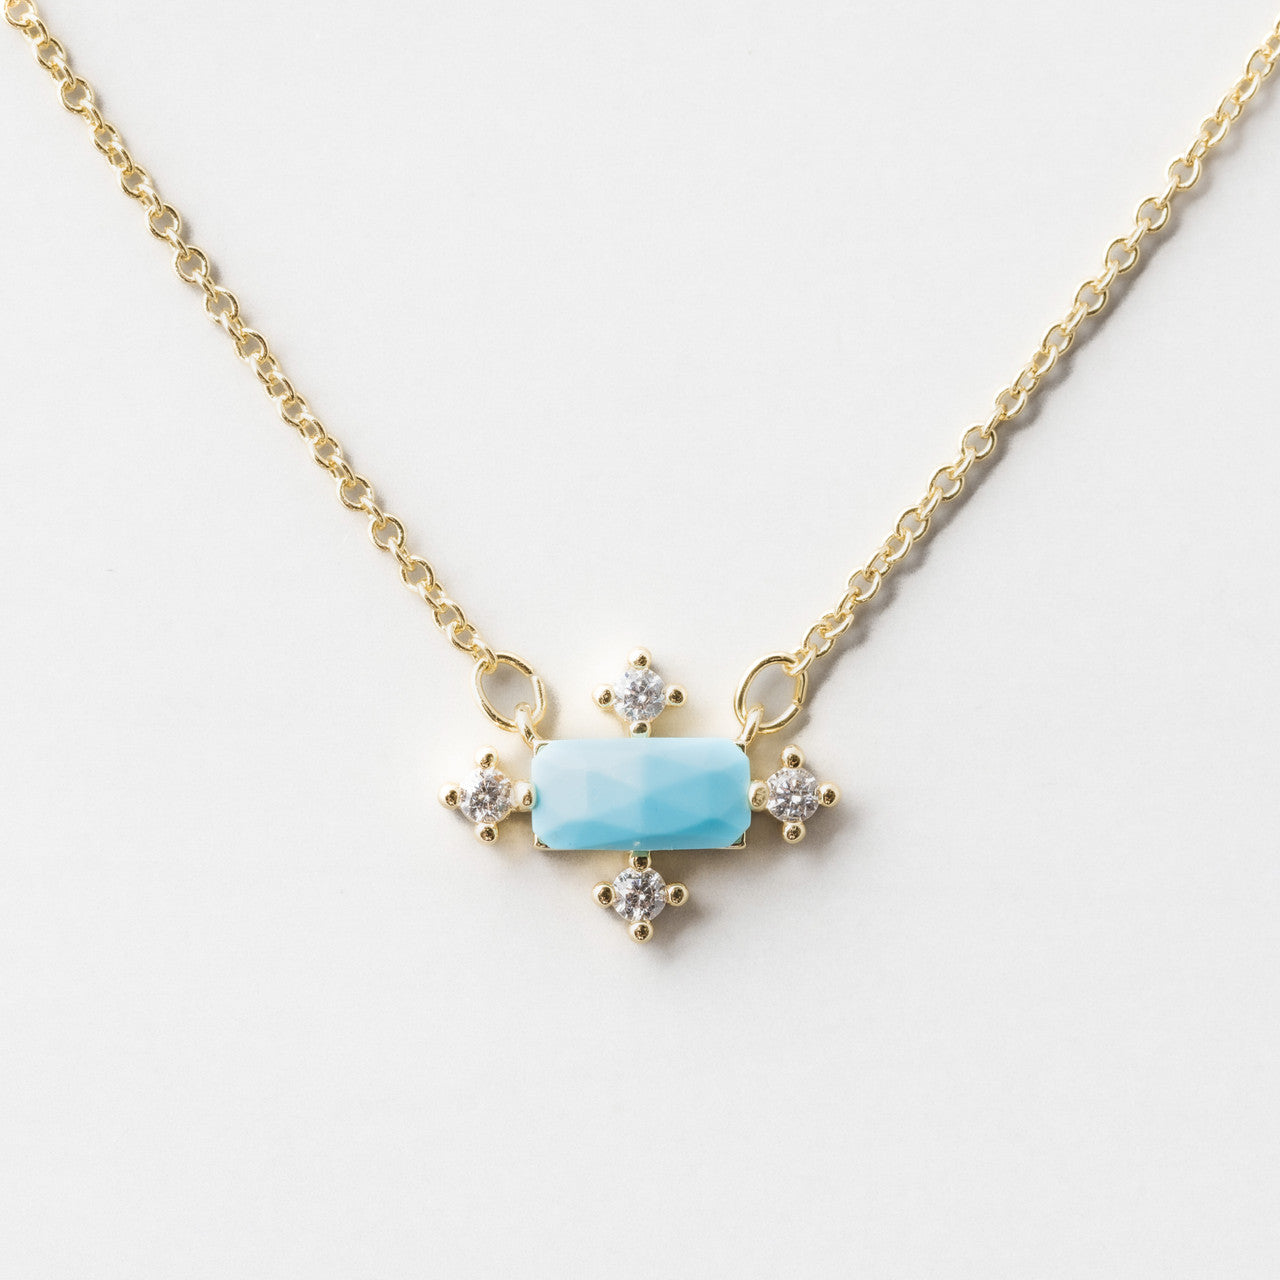 A necklace on a gold chain that has a central turquoise baquette surrounded by Cubic Zirconia on the north, south, east and west points.